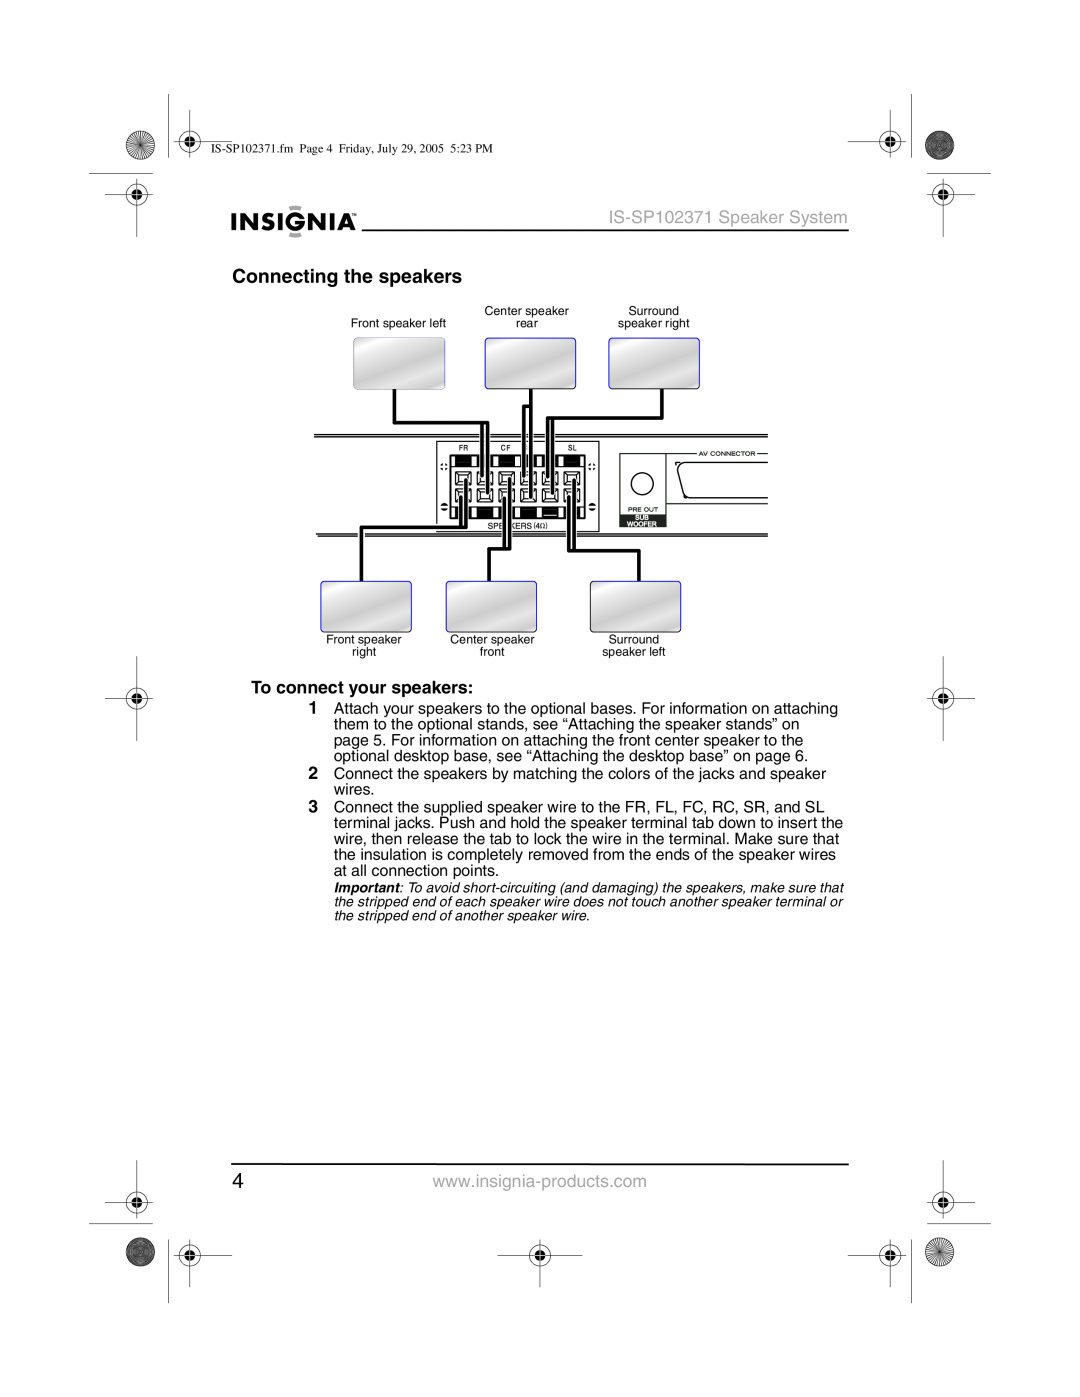 Insignia manual Connecting the speakers, To connect your speakers, IS-SP102371Speaker System 